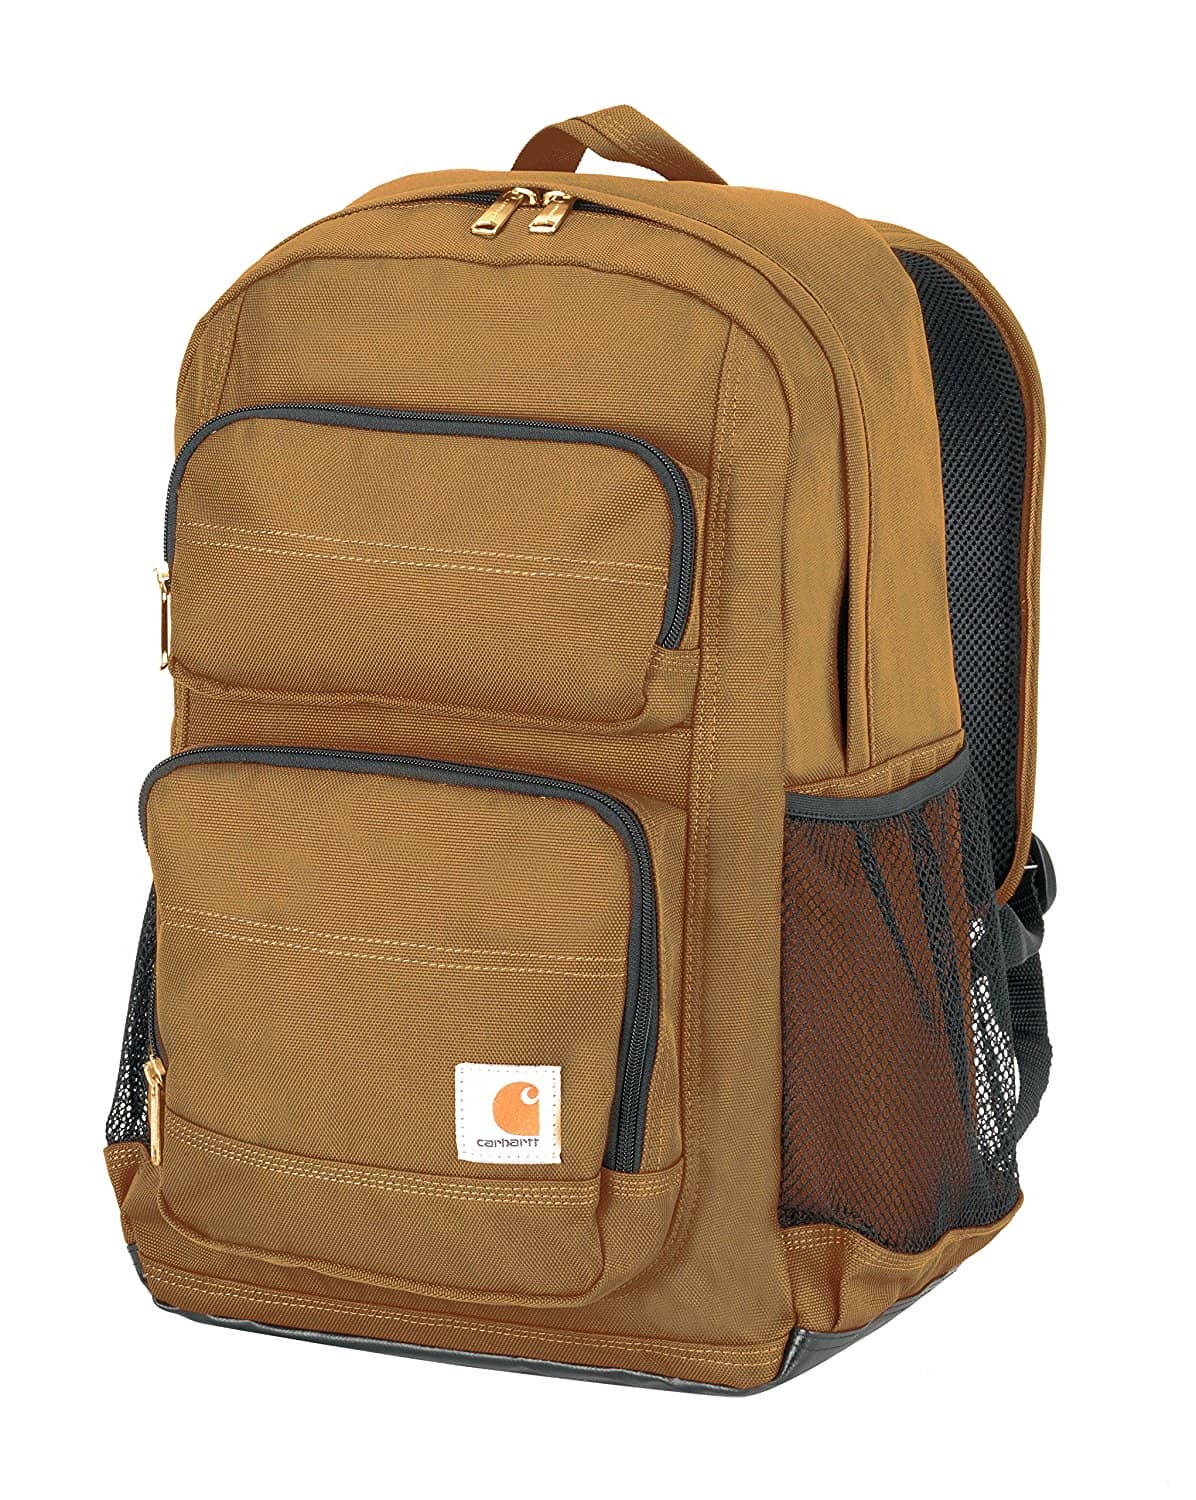 backpacks for travel and work